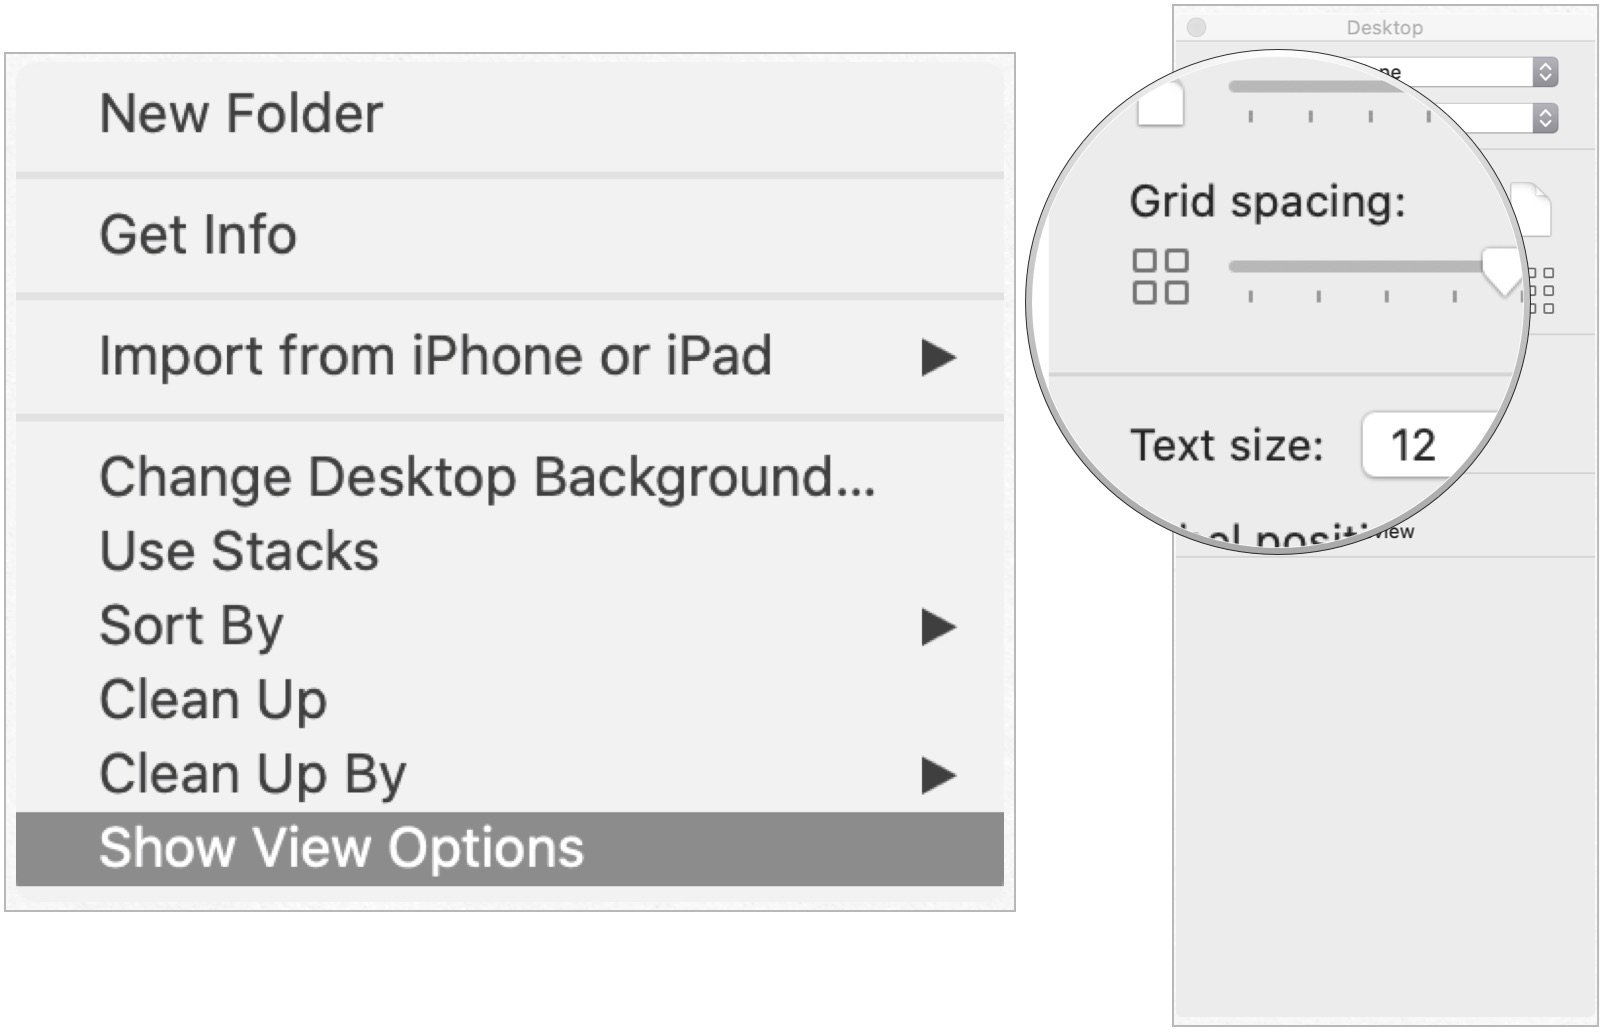 To change the grid spacing on the desktop on Mac, right-click any blank space on the desktop, then click Show View Options. Adjust the grid spacing with the slider.